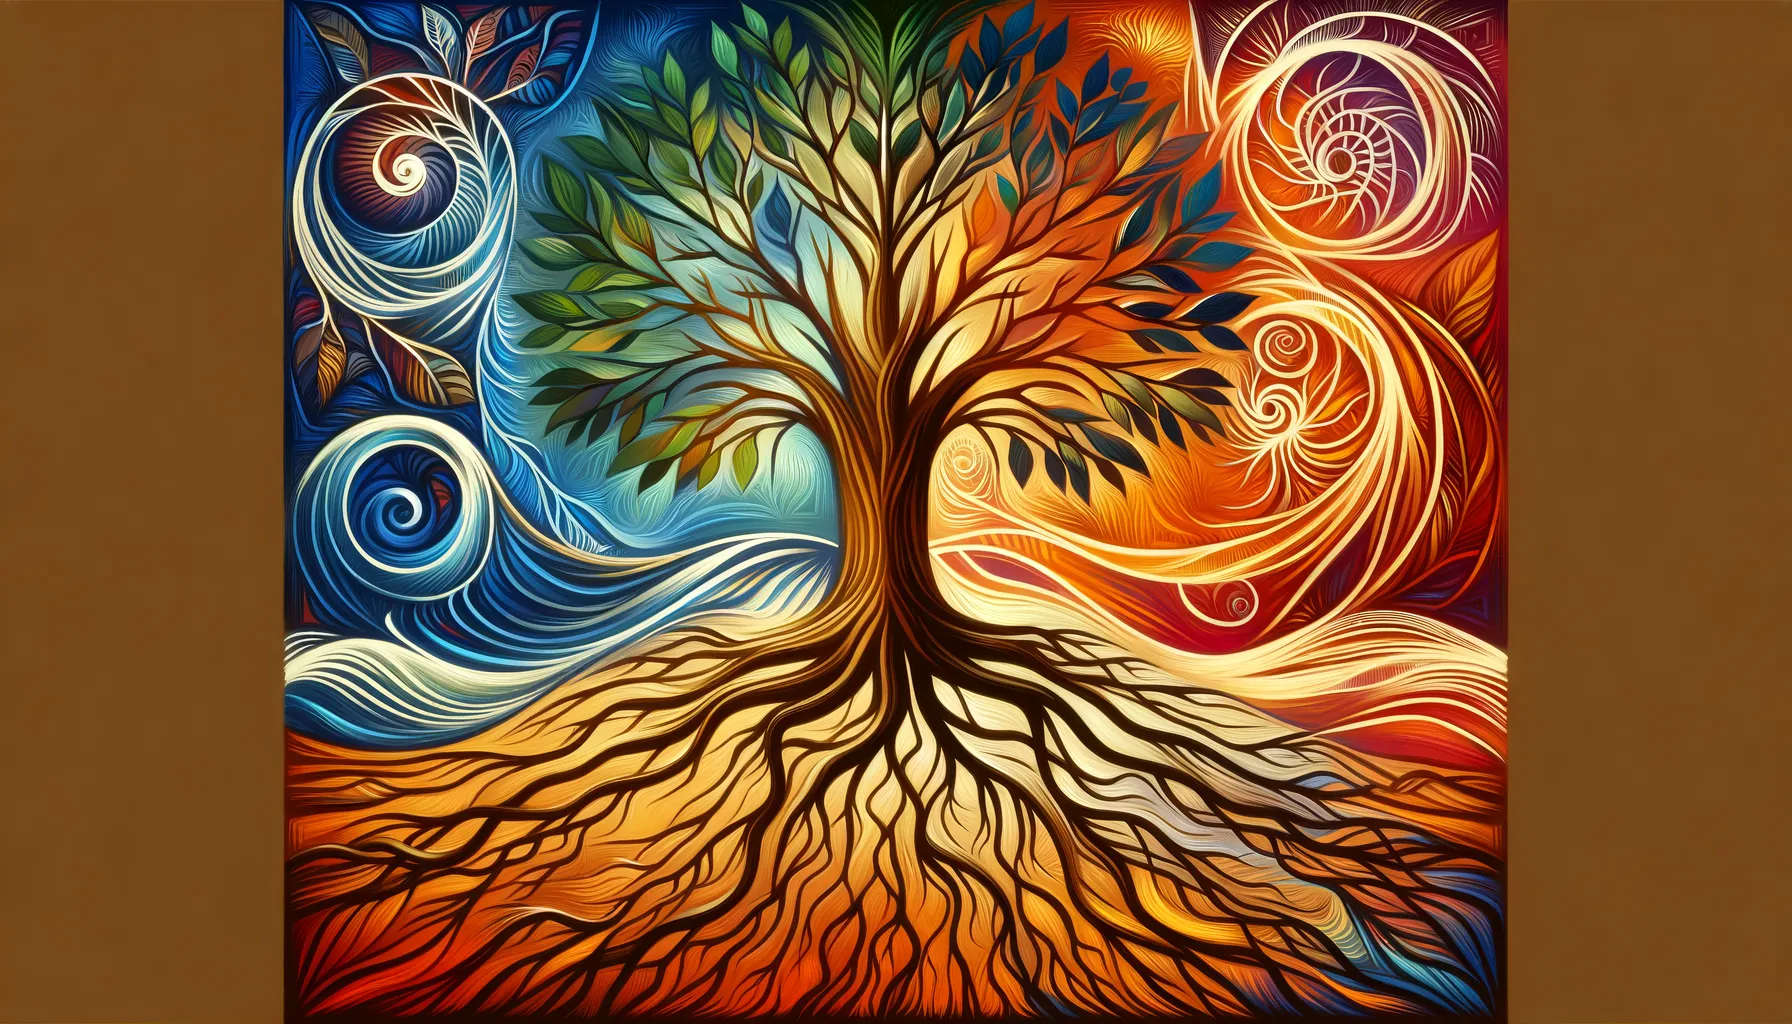 Entwined in the dance of growth, each relationship nurtures the tree of our being, with roots of trust and branches of shared experiences reaching skyward—symbolizing the intertwined journey of connection and personal evolution.